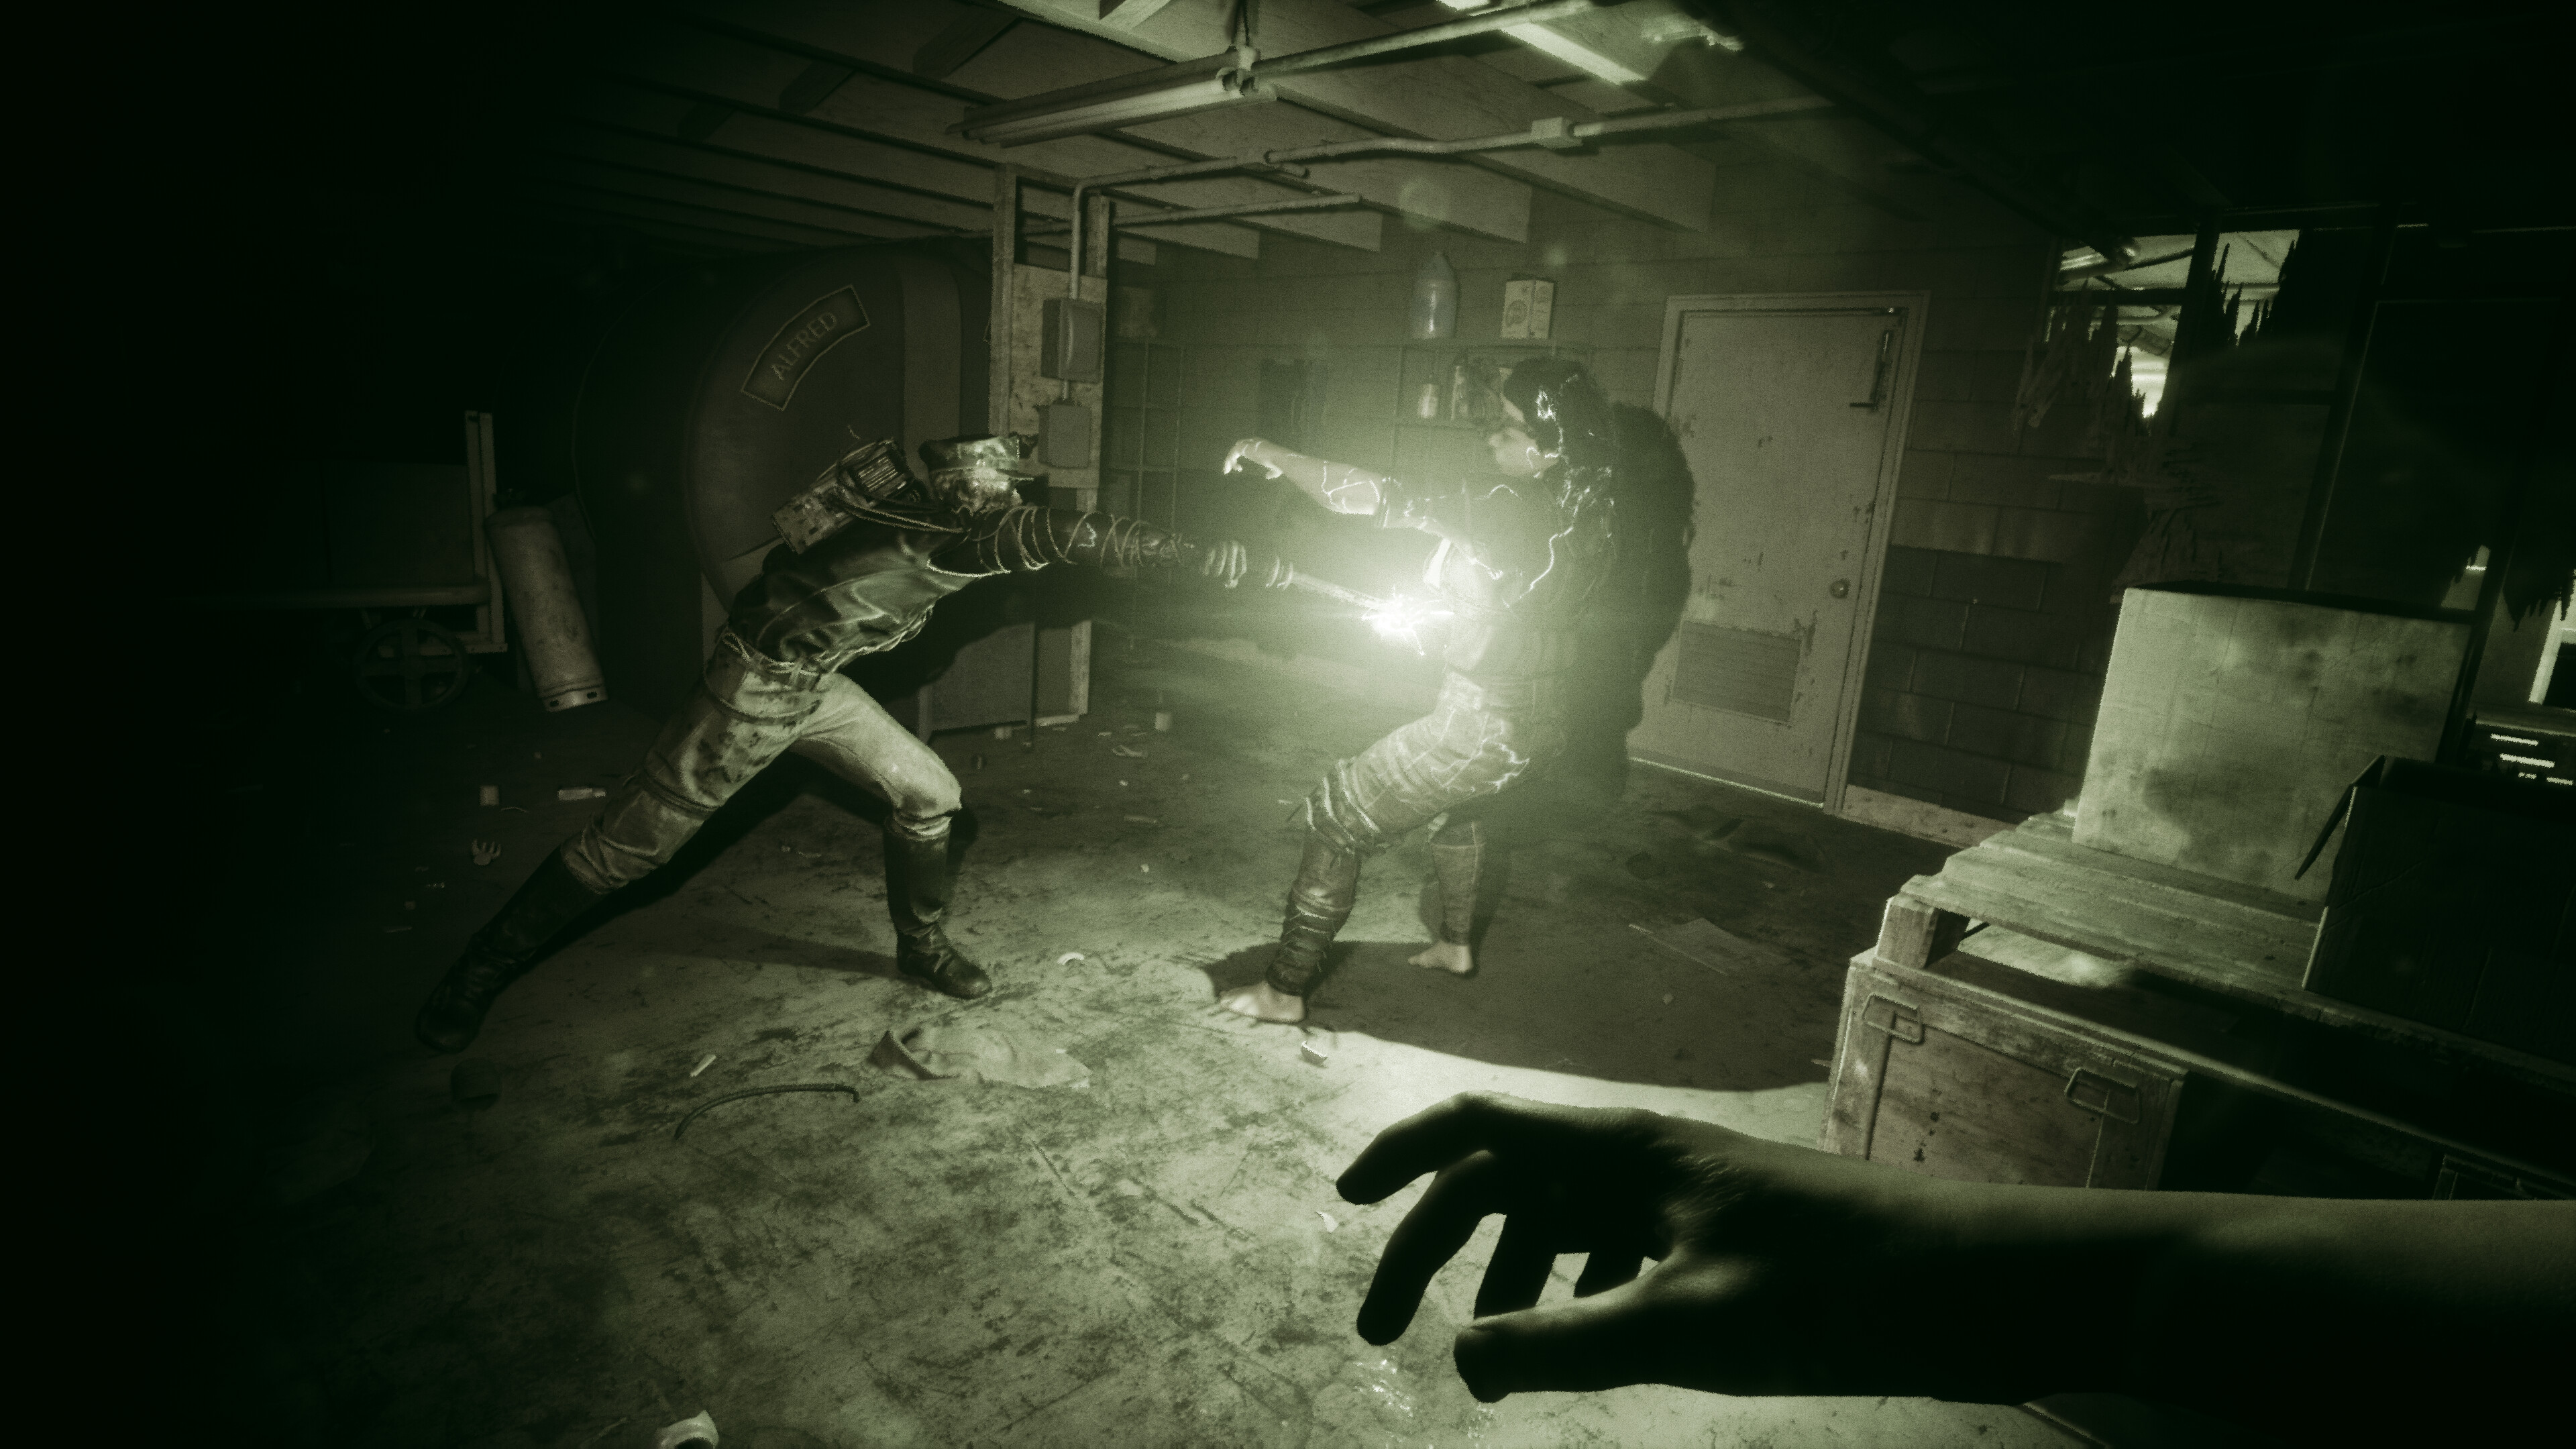 The Outlast Trials invites you to experience mind-numbing terror when it  launches in early access in May